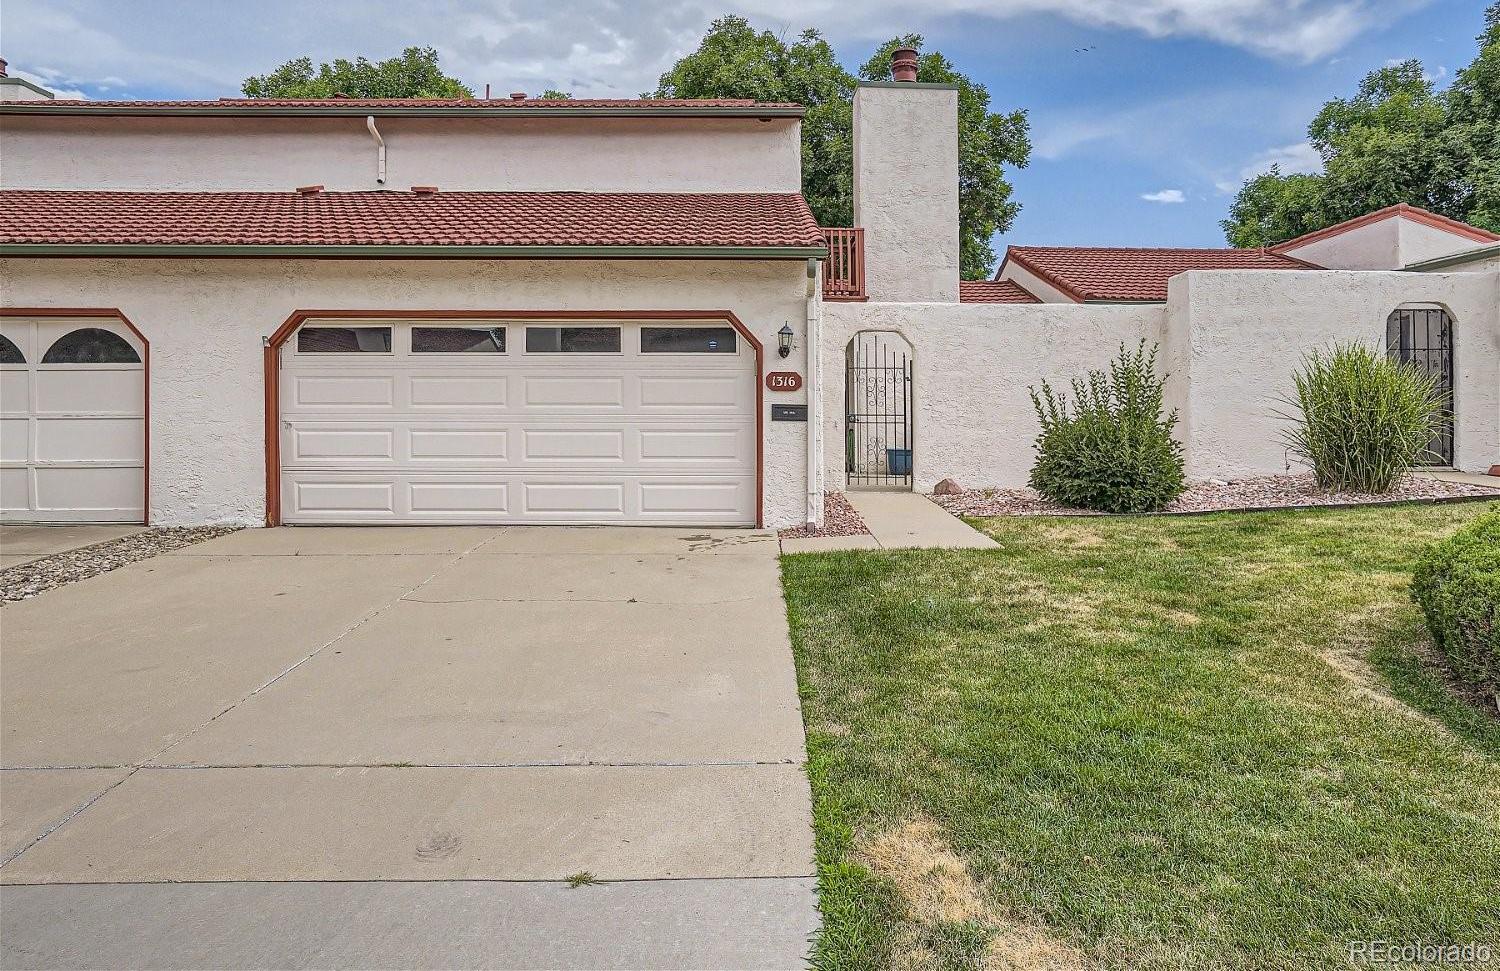 Photo one of 1316 Sequerra St Broomfield CO 80020 | MLS 6973862